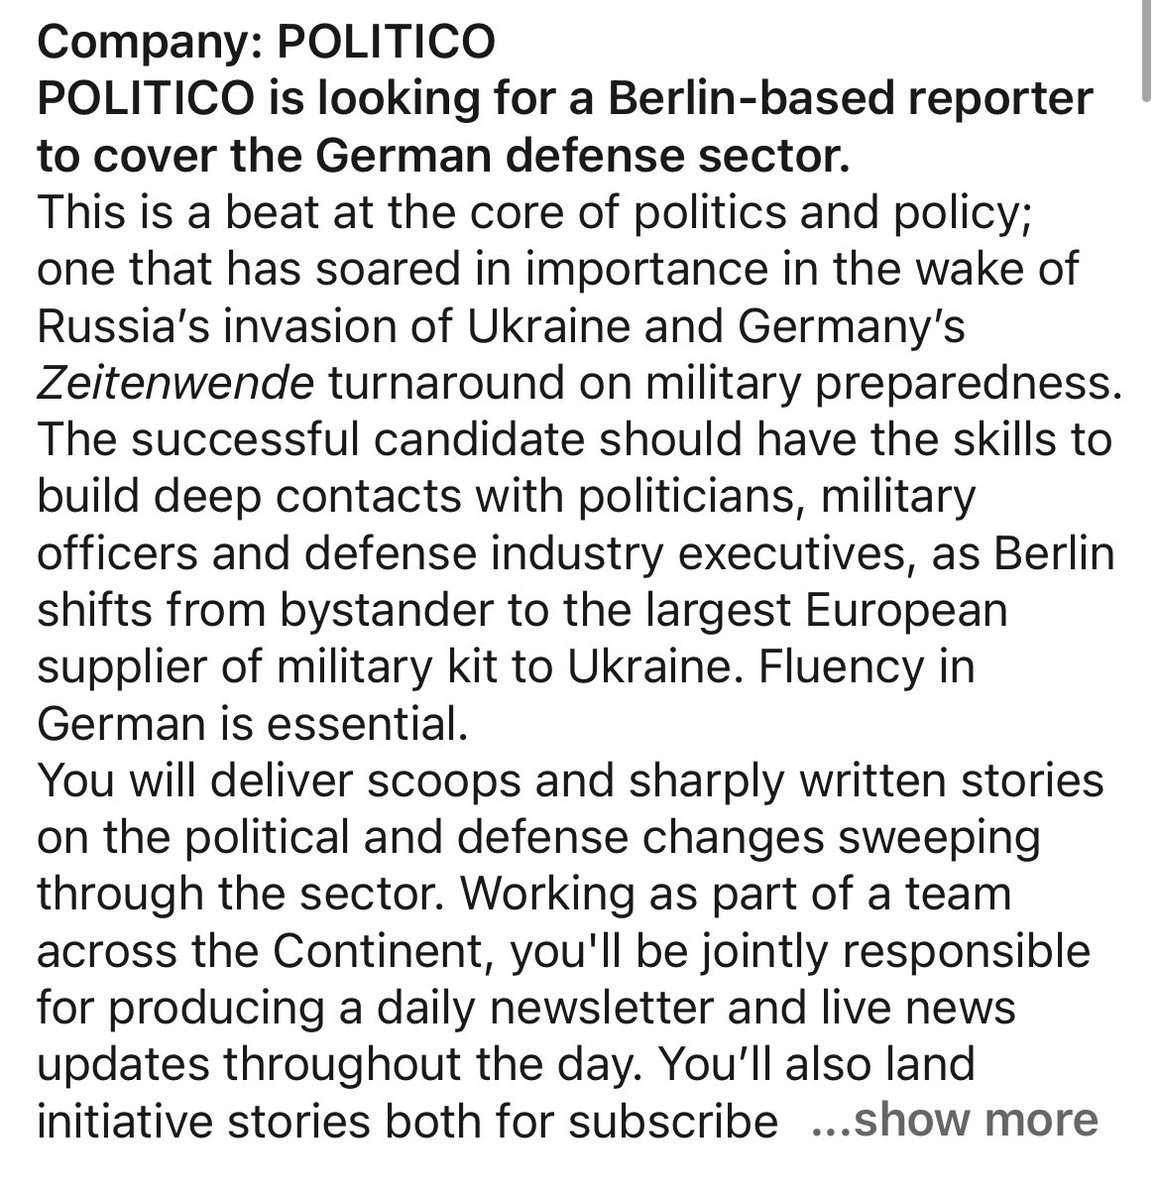 Zeitenwende: Politico is looking for a Berlin-based reporter to cover the German defense sector